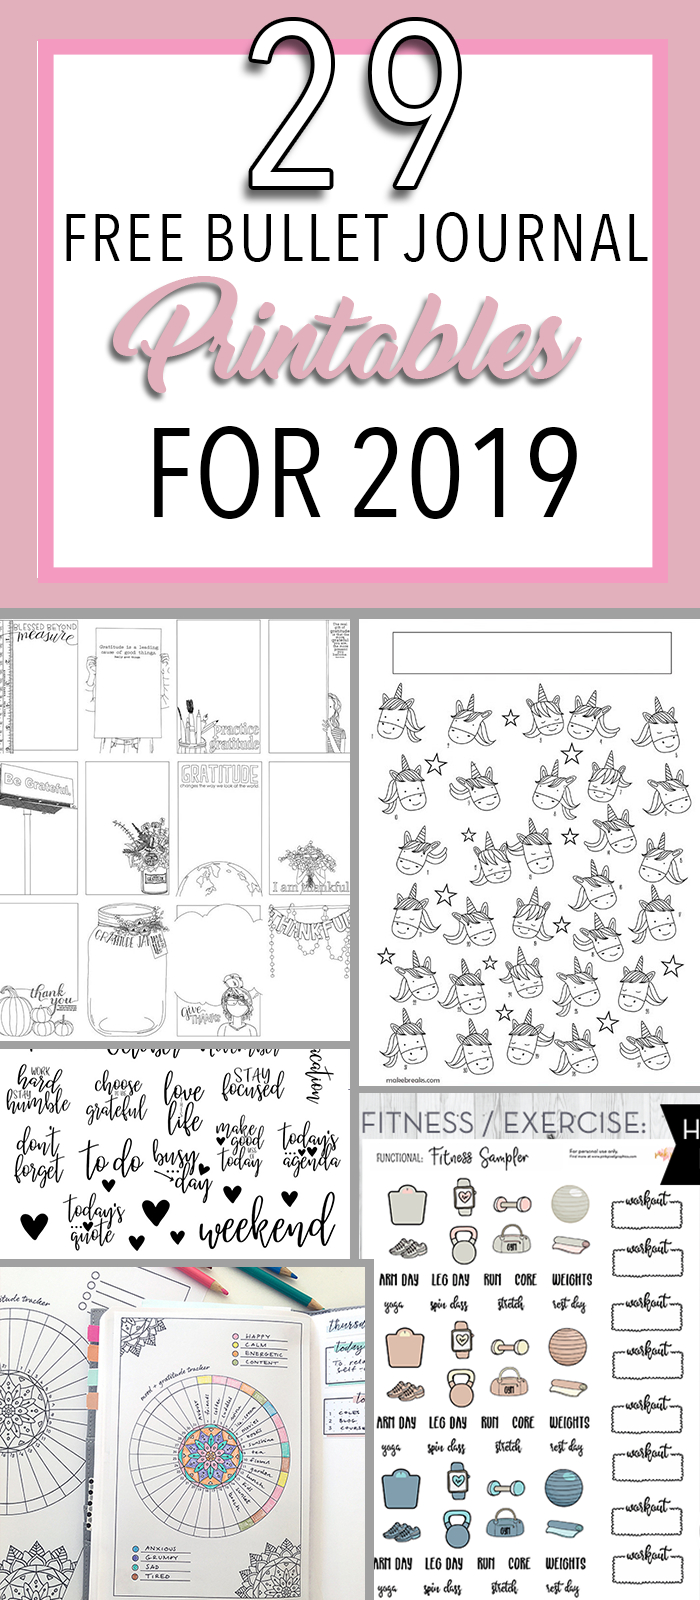 29 Free Bullet Journal Printables To Snag For 2019 | The Petite - Free Printable Bullet Journal Pages